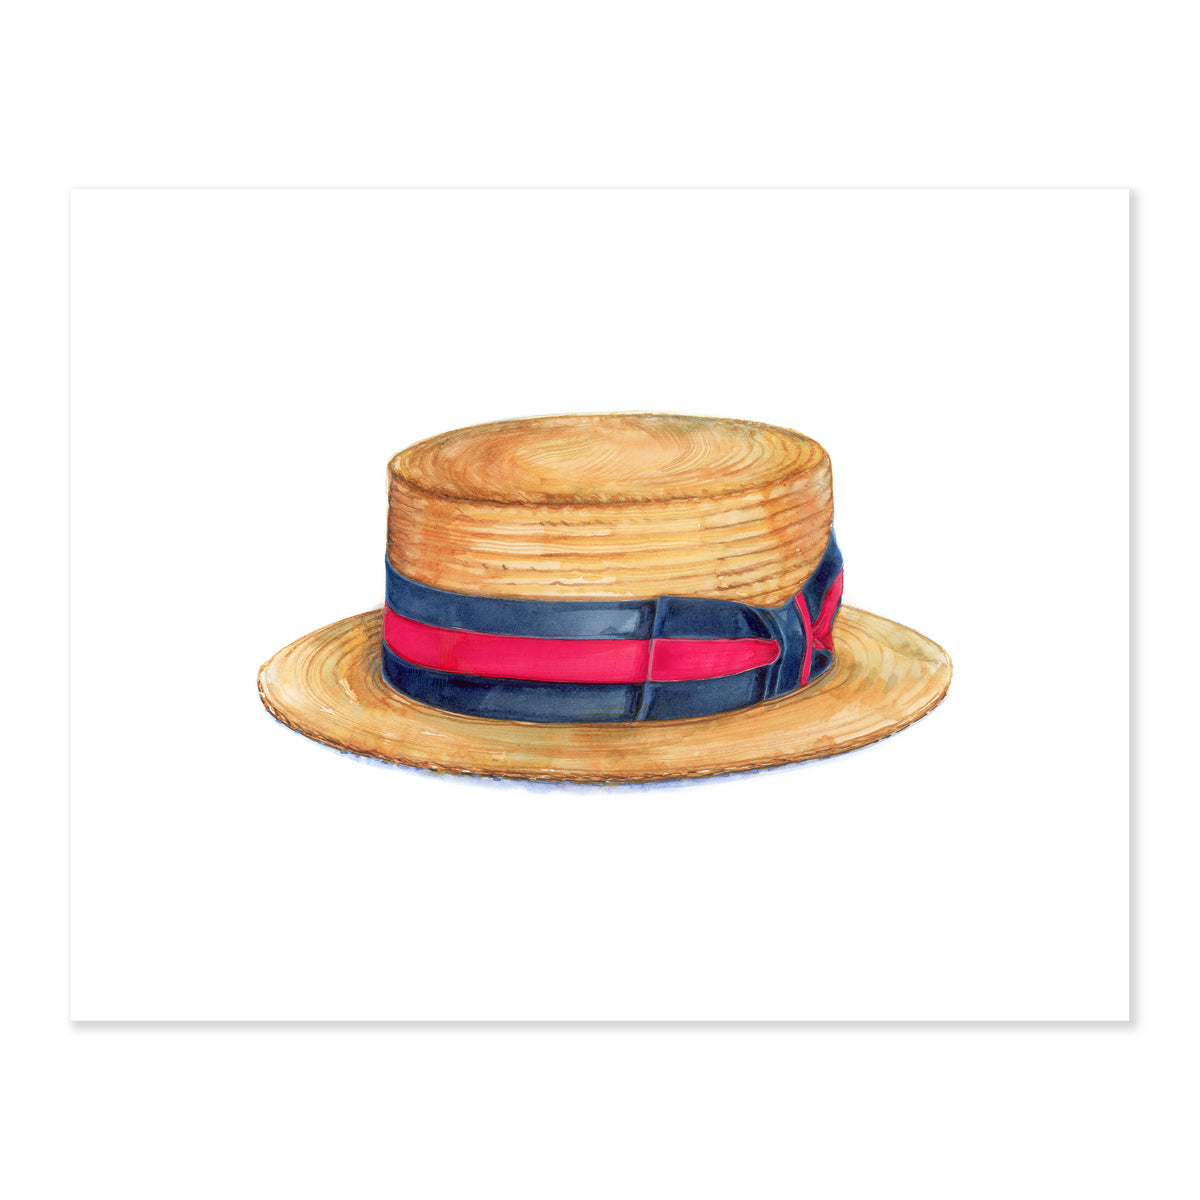 A fine art print illustrating a straw boater hat featuring a navy and red striped ribbon painted with watercolors on a soft white background